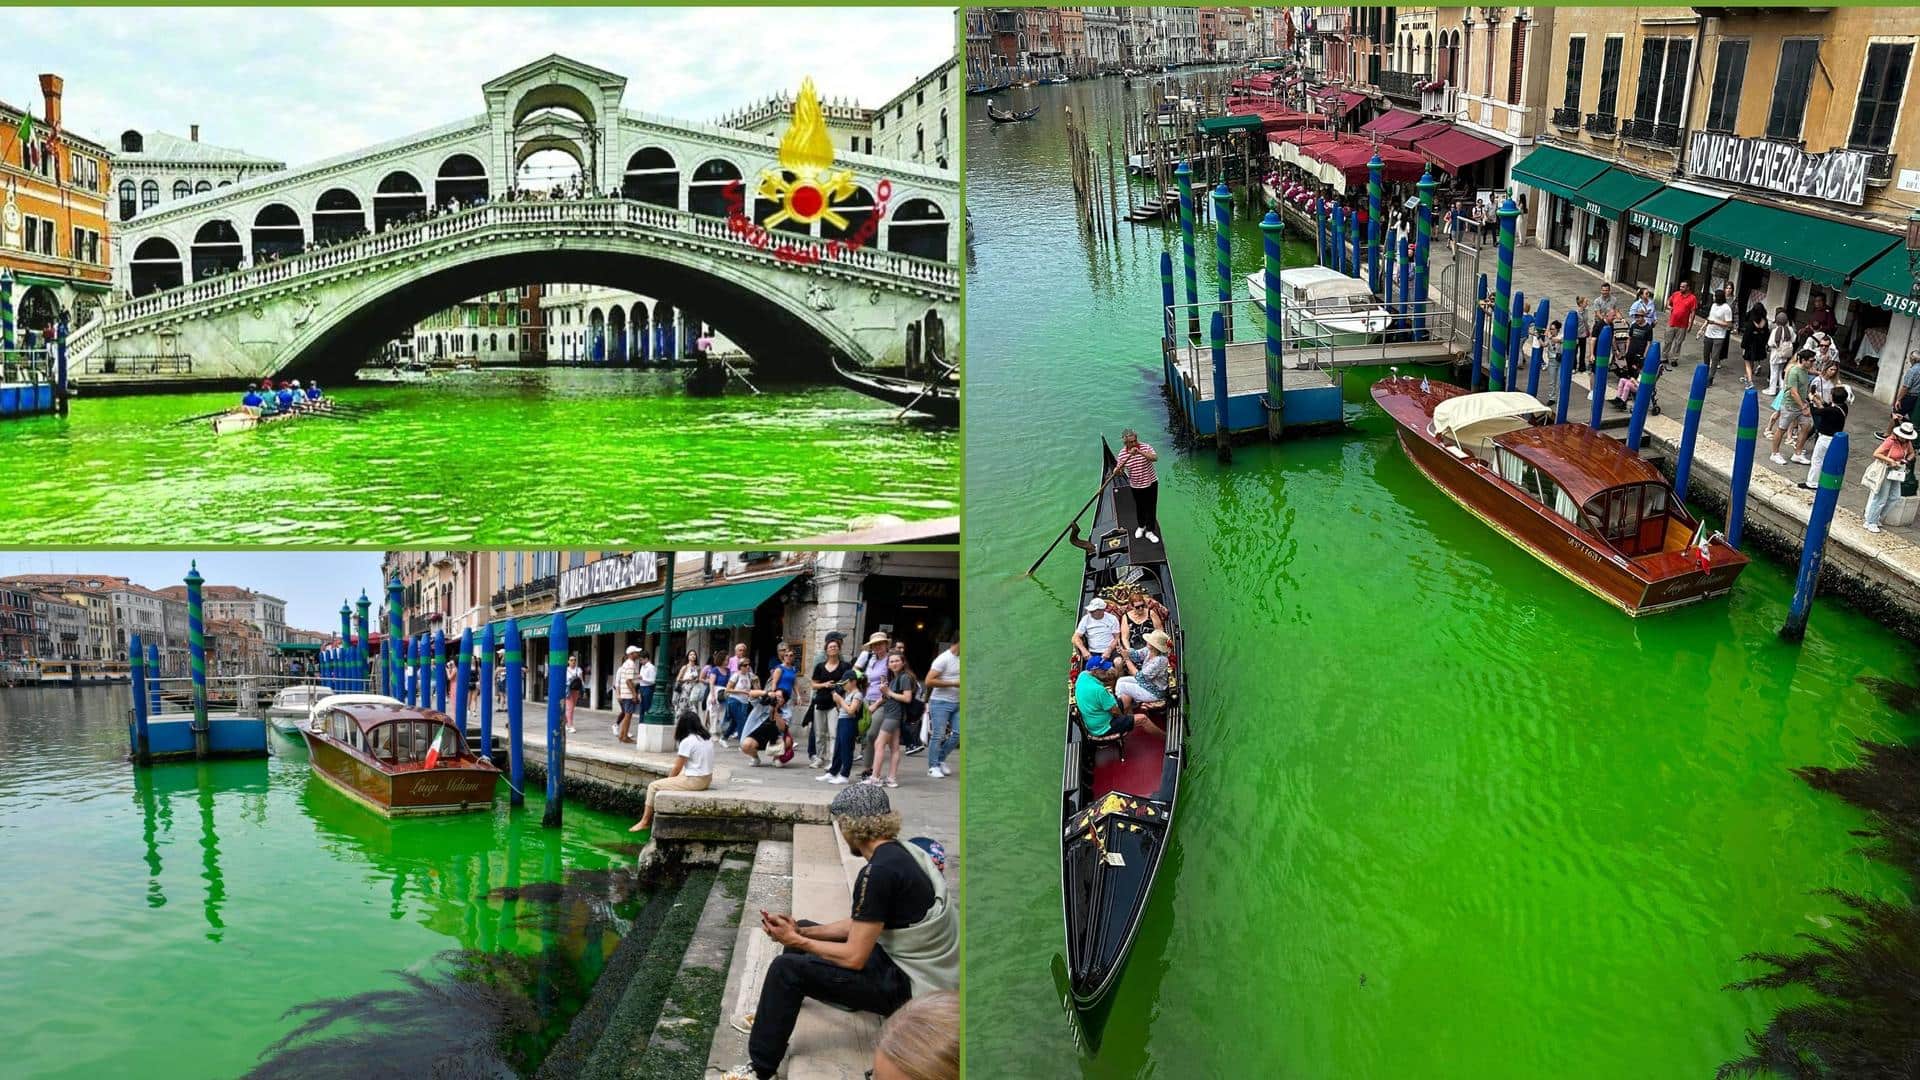 Venice canal has turned green, and no one knows why